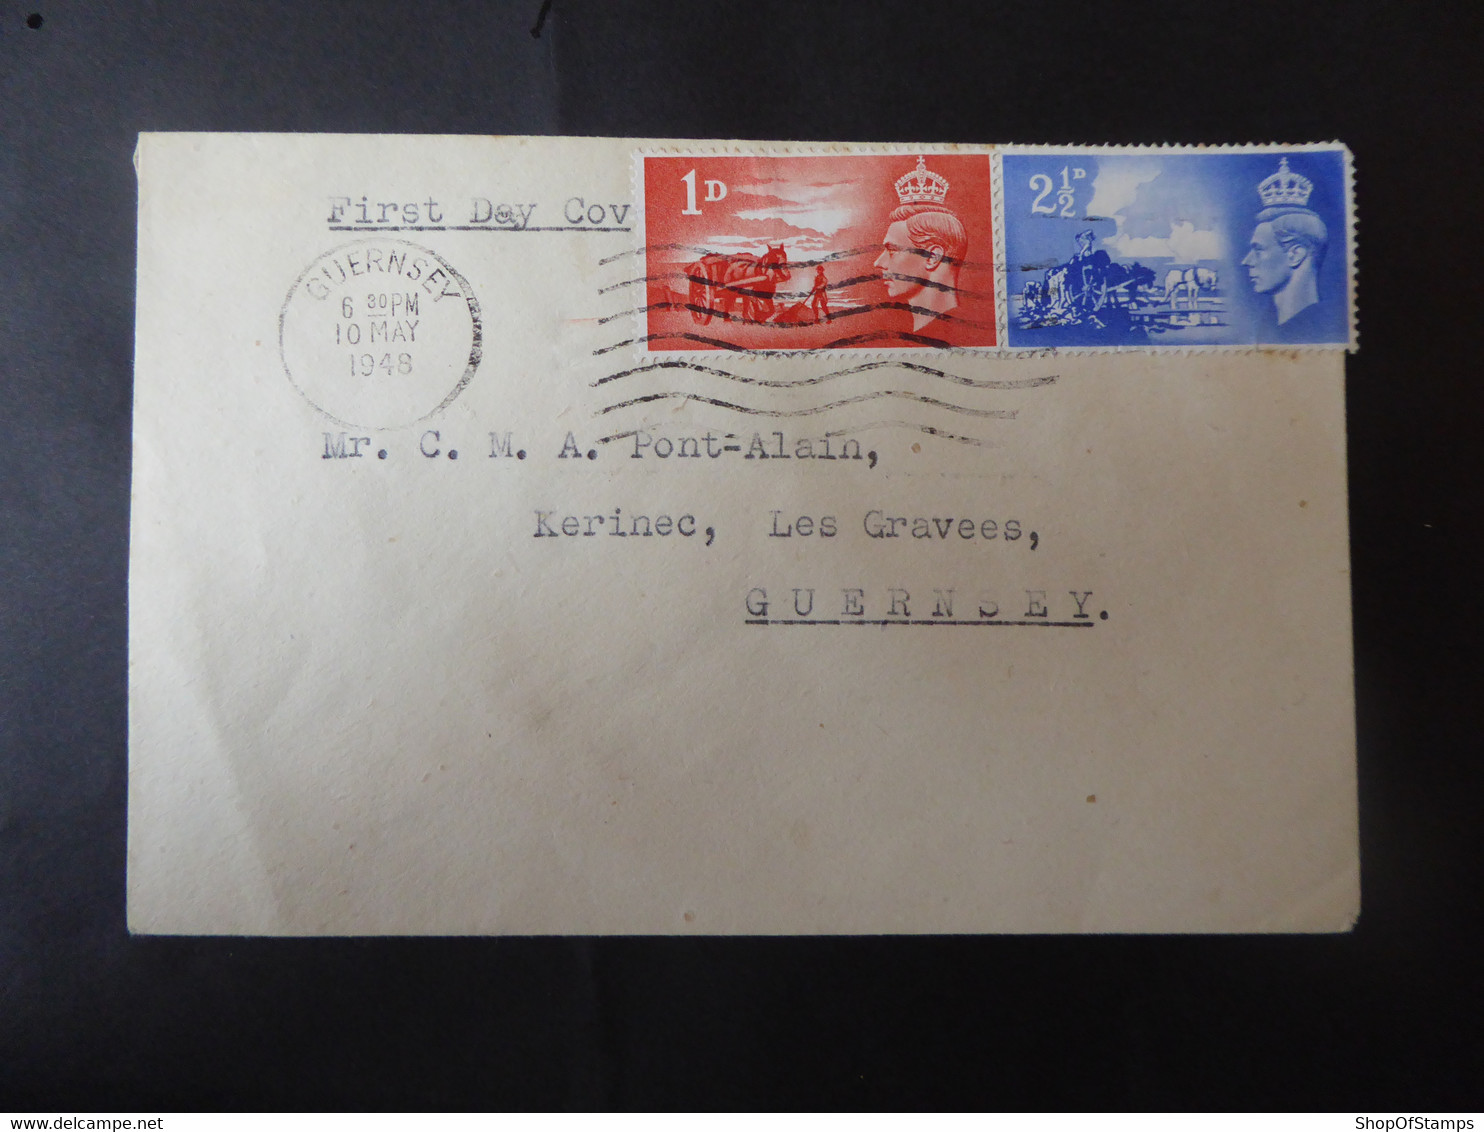 CHANNEL ISLANDS SG C1-2 FDC WITH POSTMARK GUERNSEY 10 MAY 1942 - Ohne Zuordnung